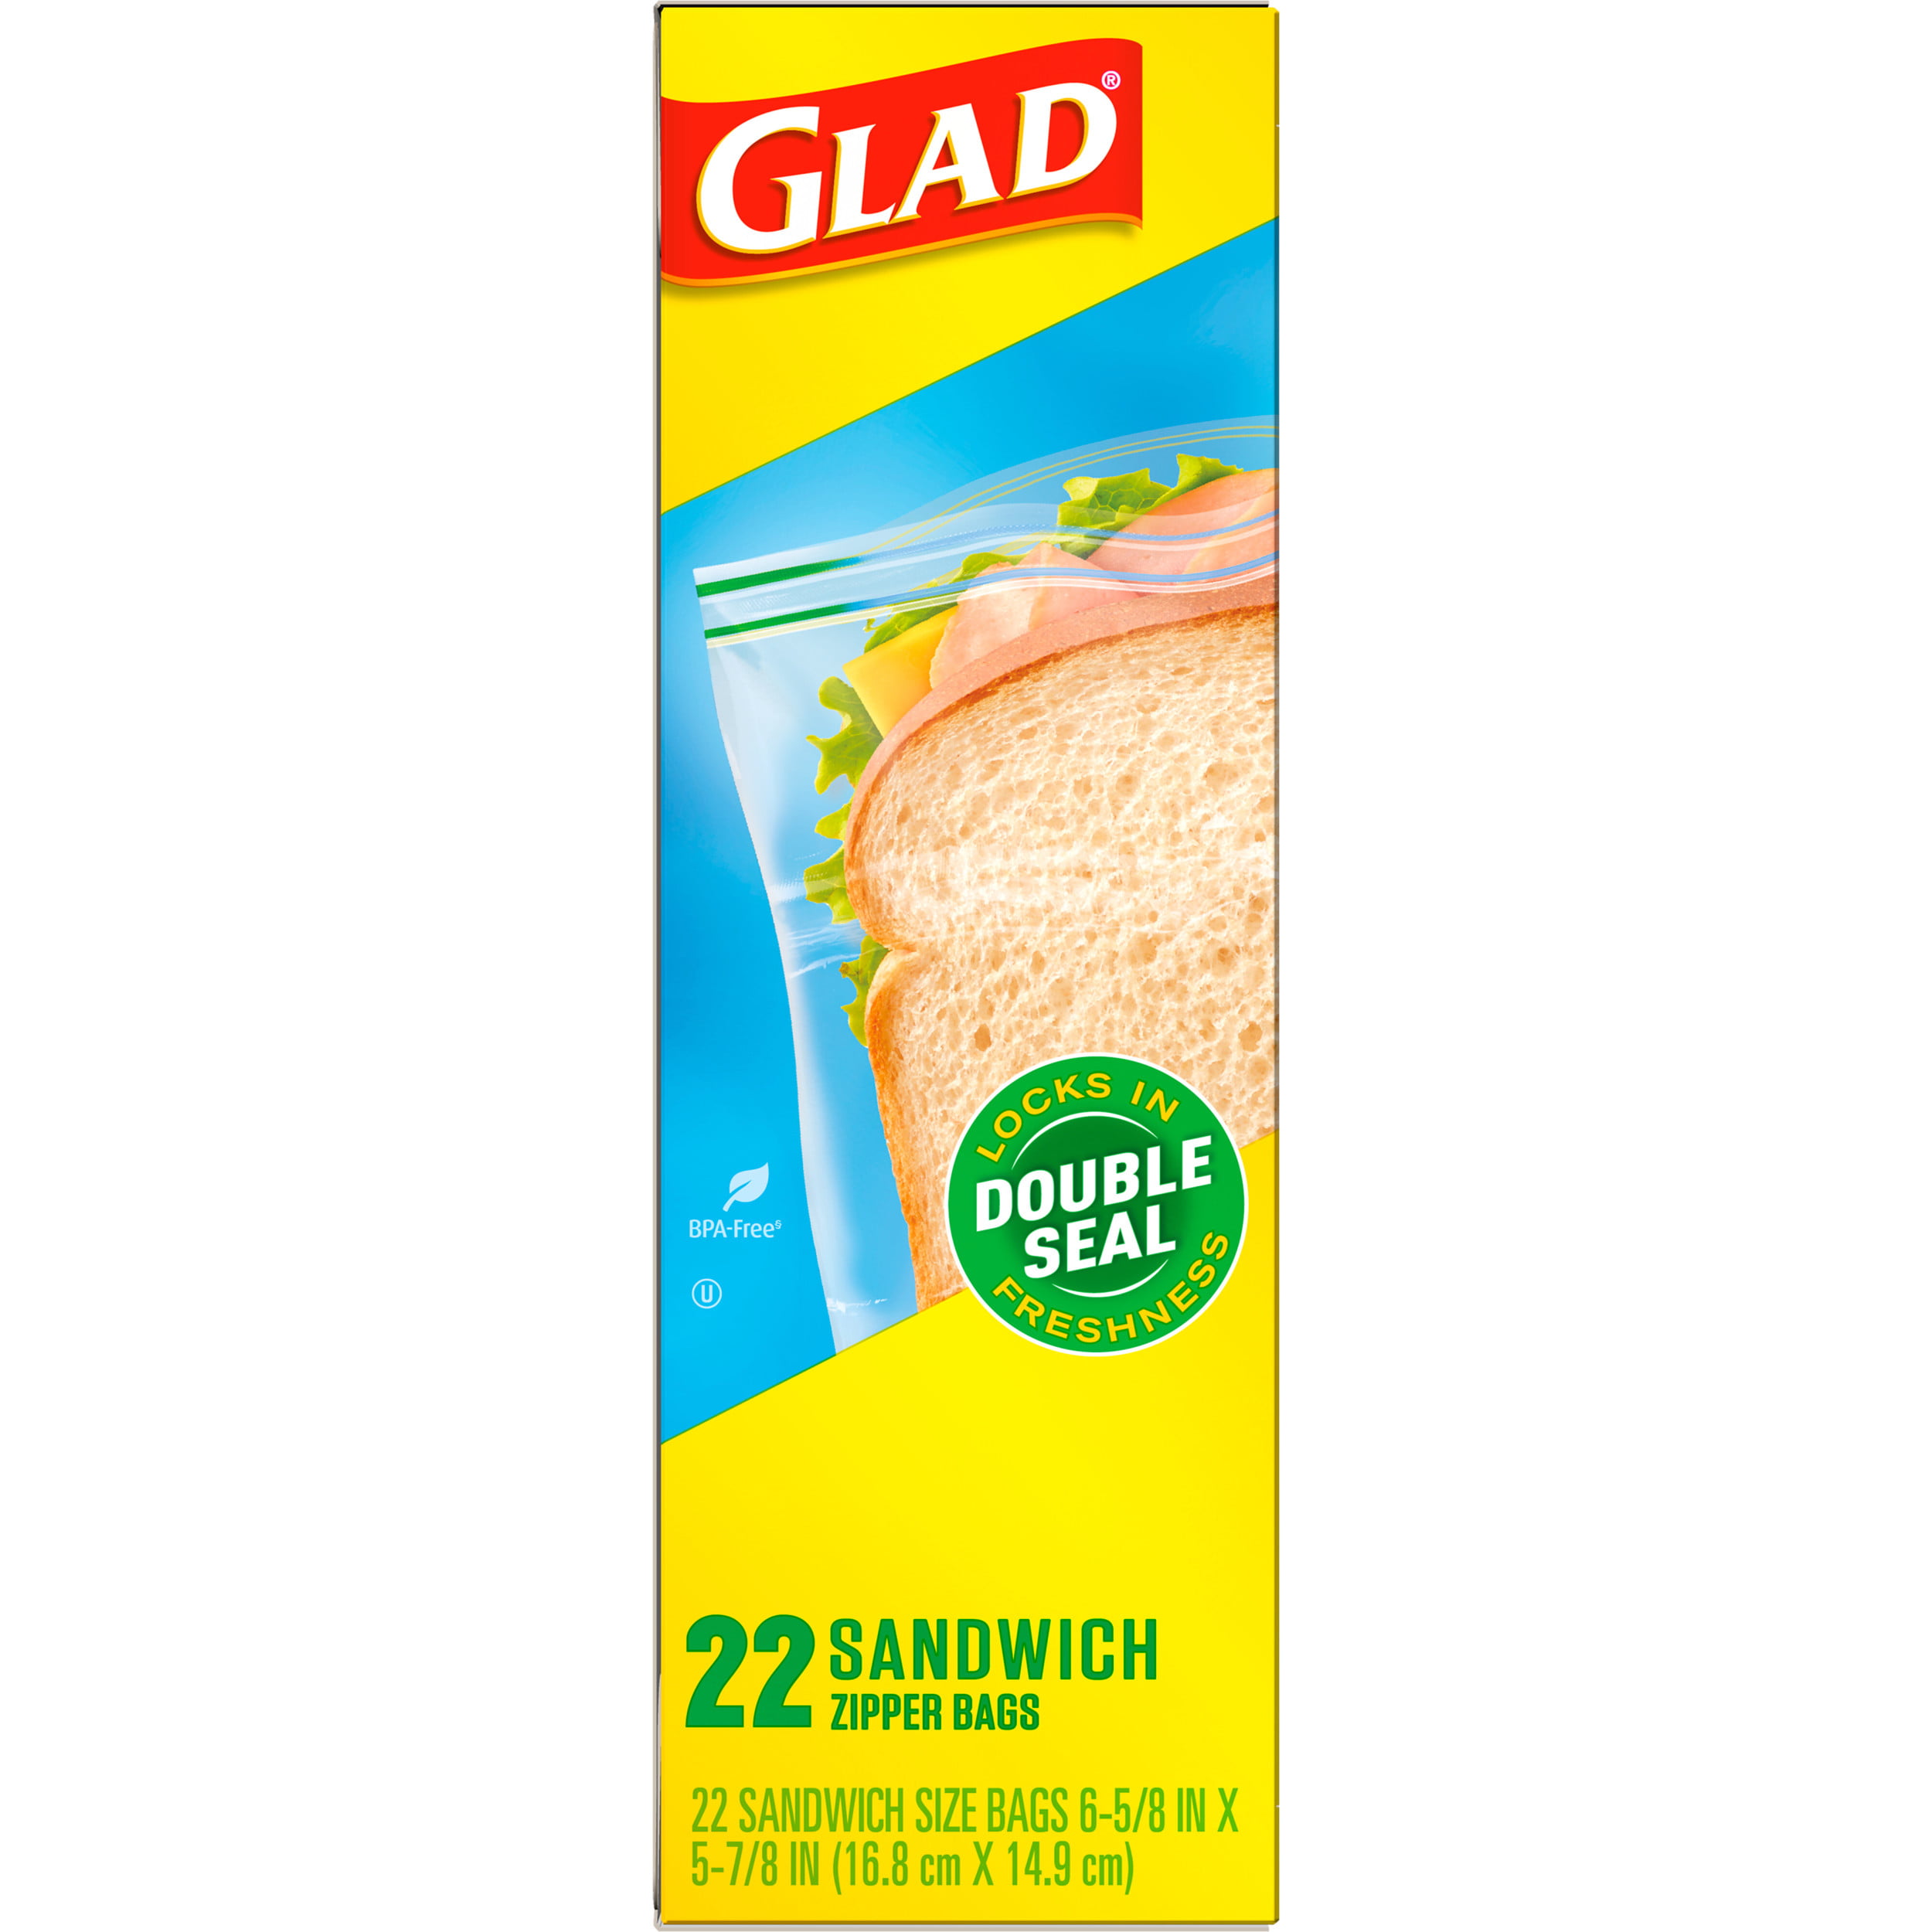 Glad Sandwich Zipper Bags Lot of 1 - 115 Count Free Ship.